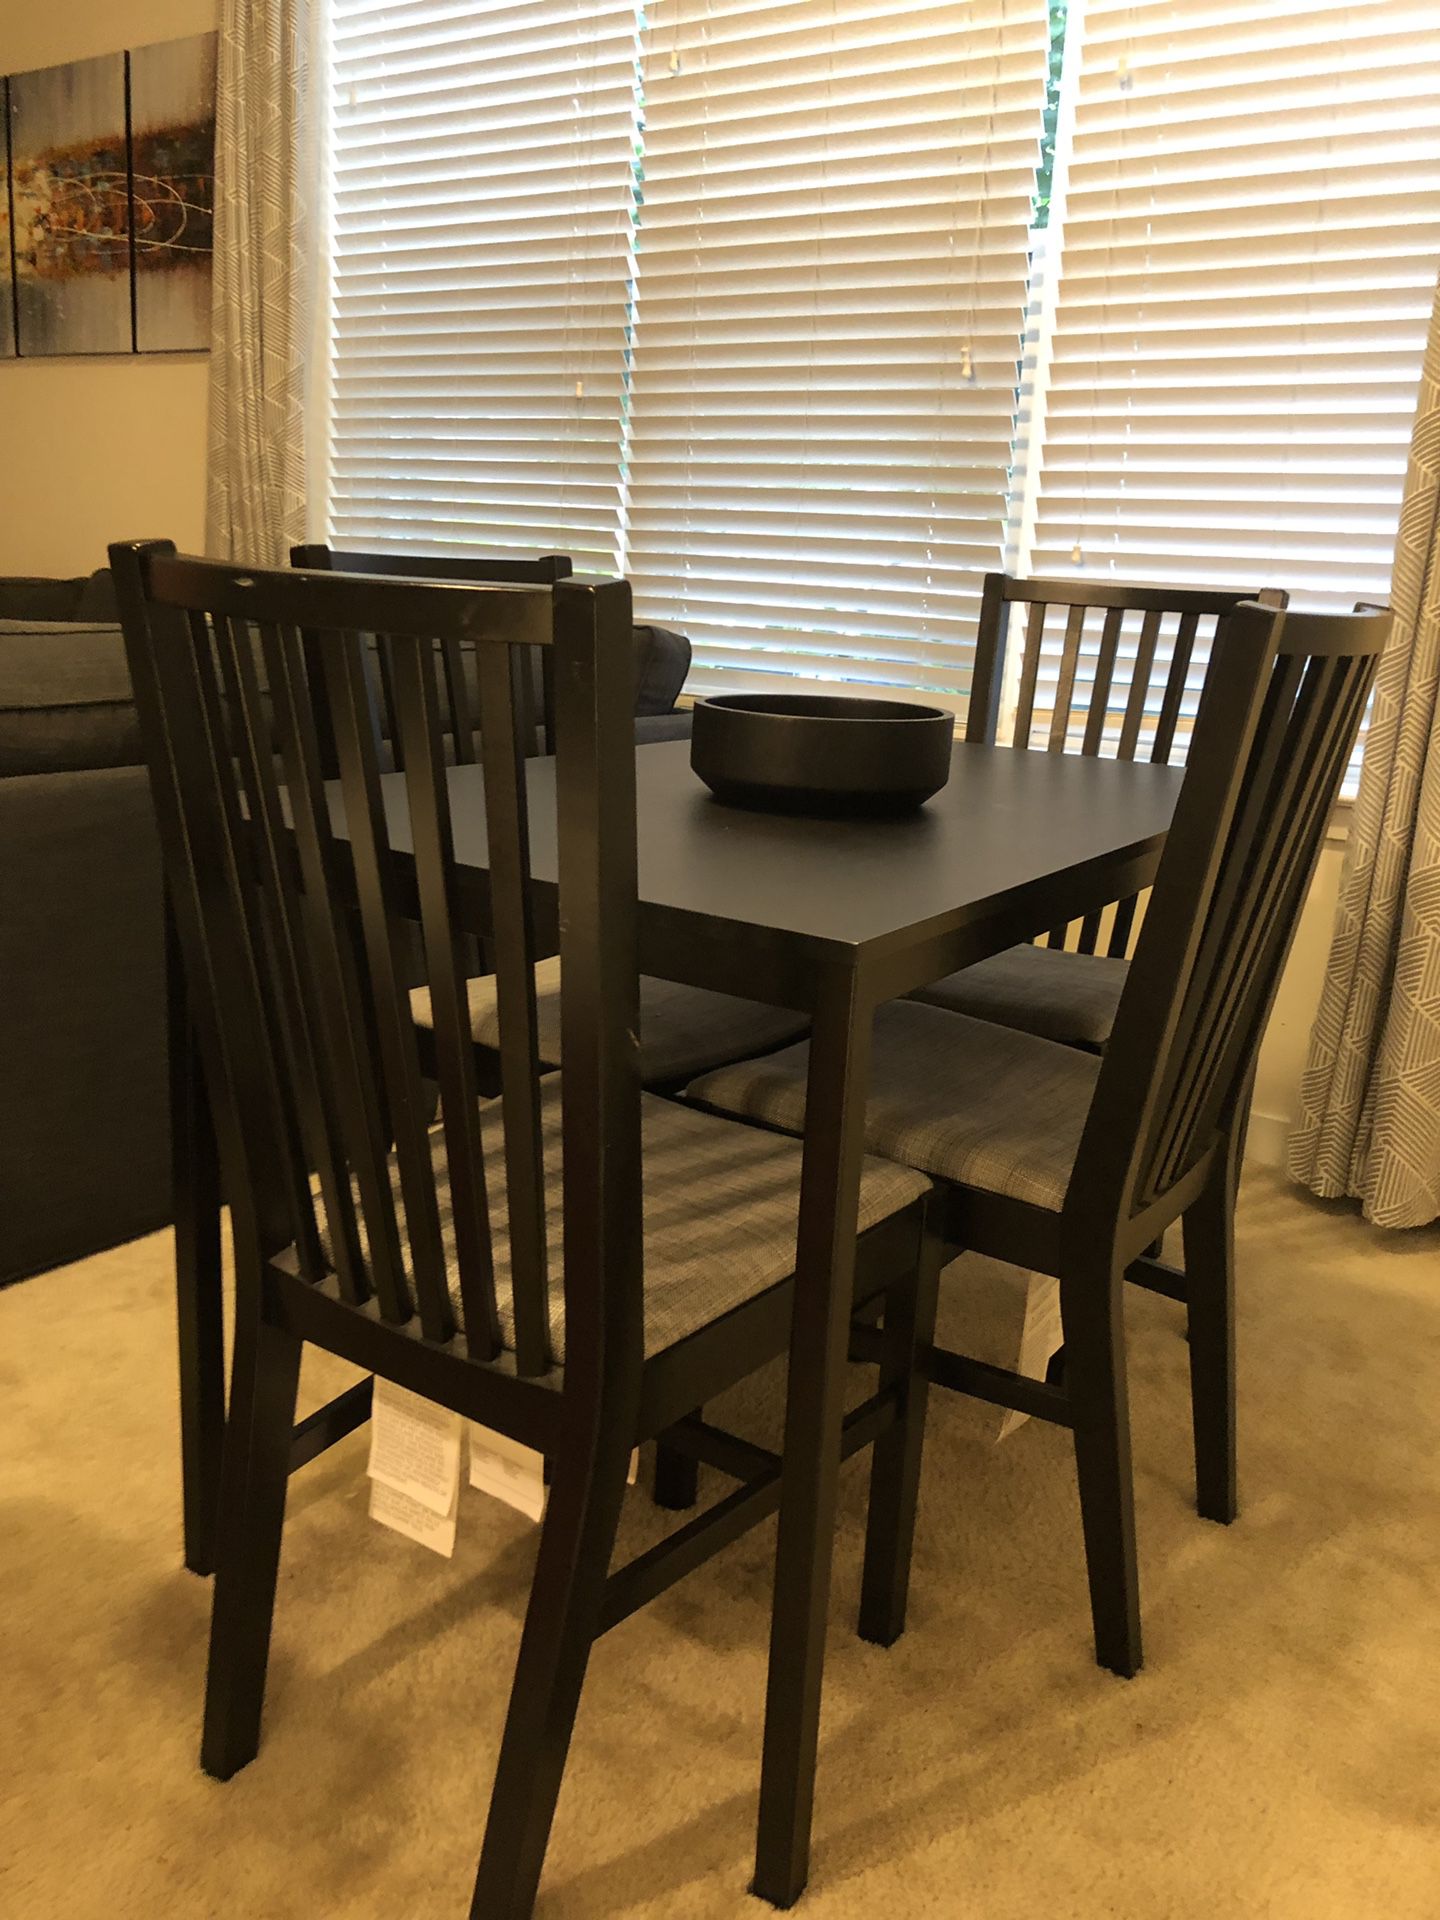 IKEA kitchen table with center piece included